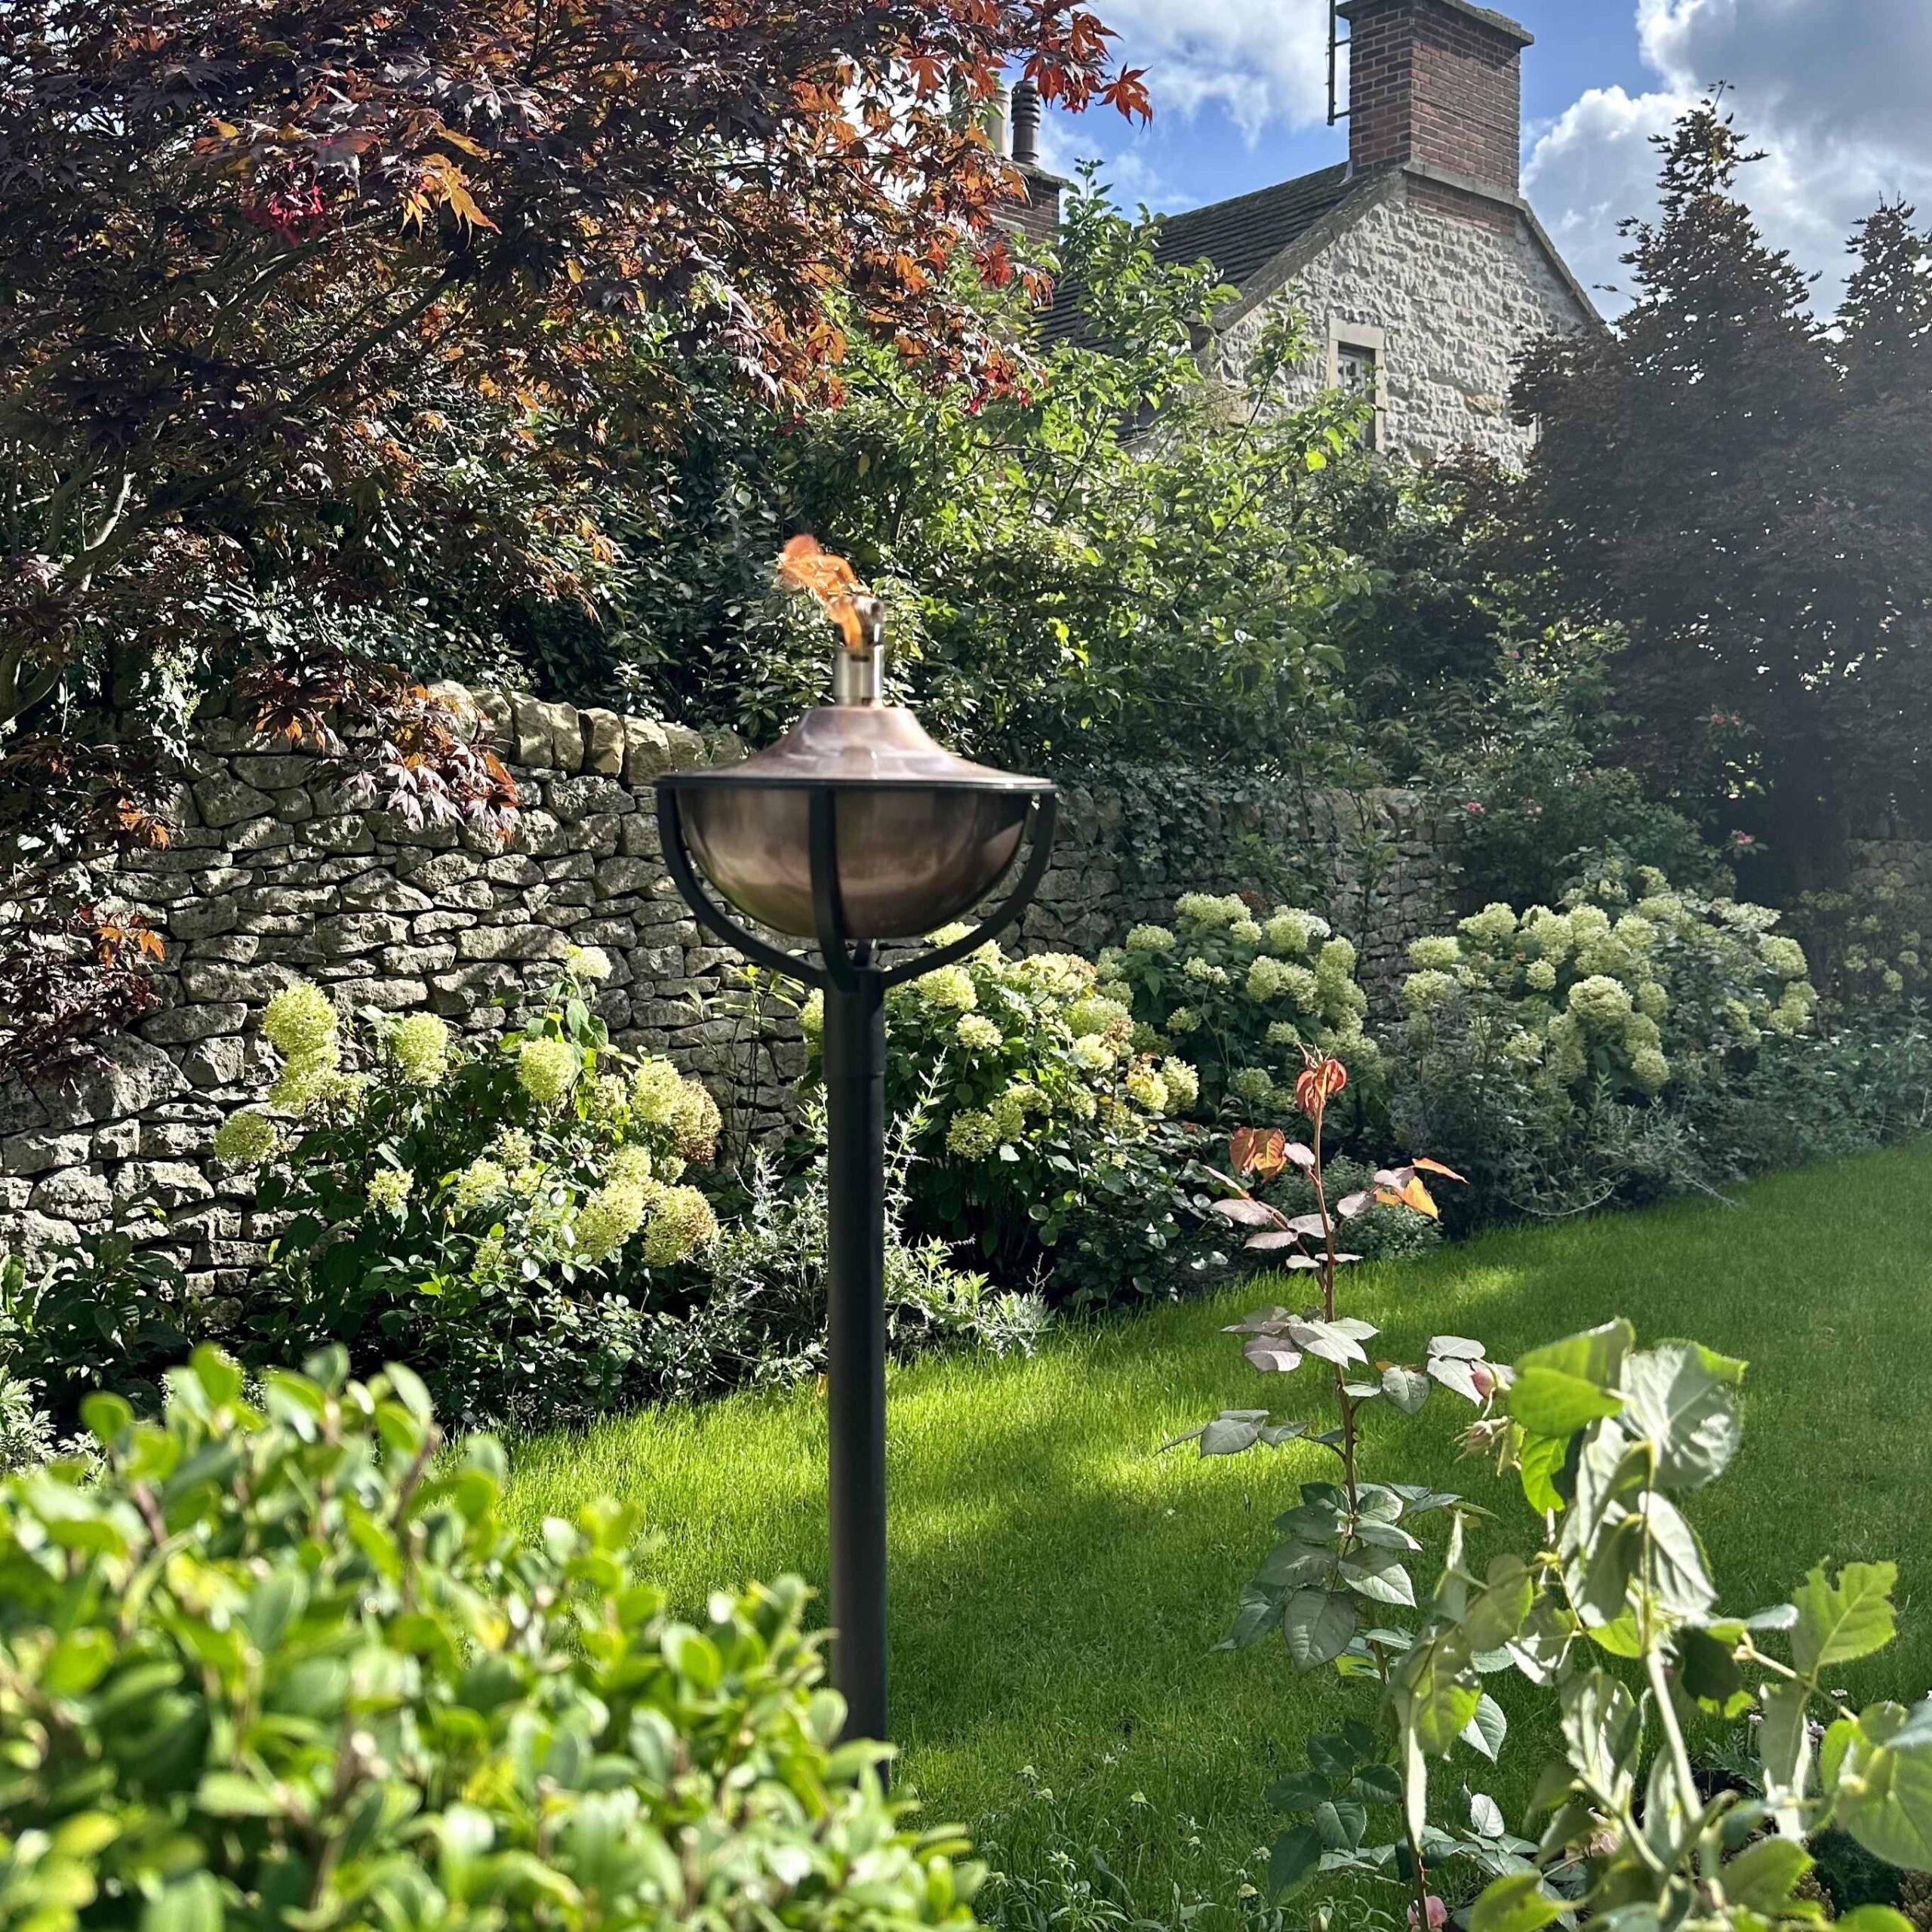 Aged copper Classica oil torch on black pole in sunny garden setting, in front of stone wall on lawn